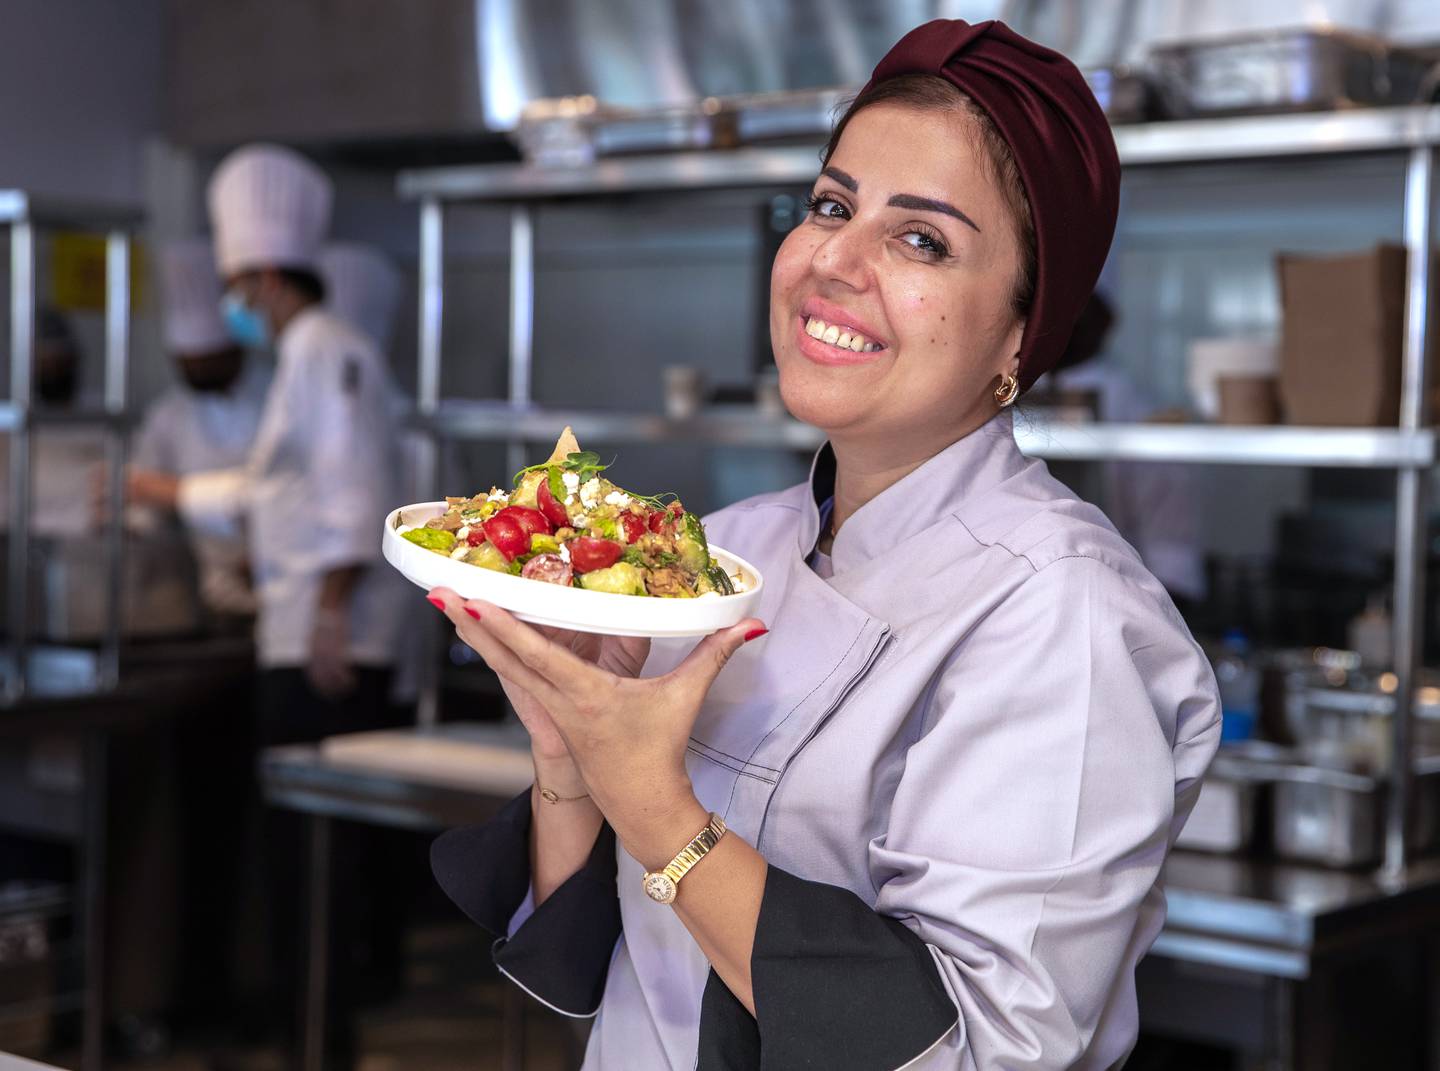 Fattoush by Chef Duha at the Rising Flavours pavilion in Jubilee Park Expo 2020 Dubai. Victor Besa / The National